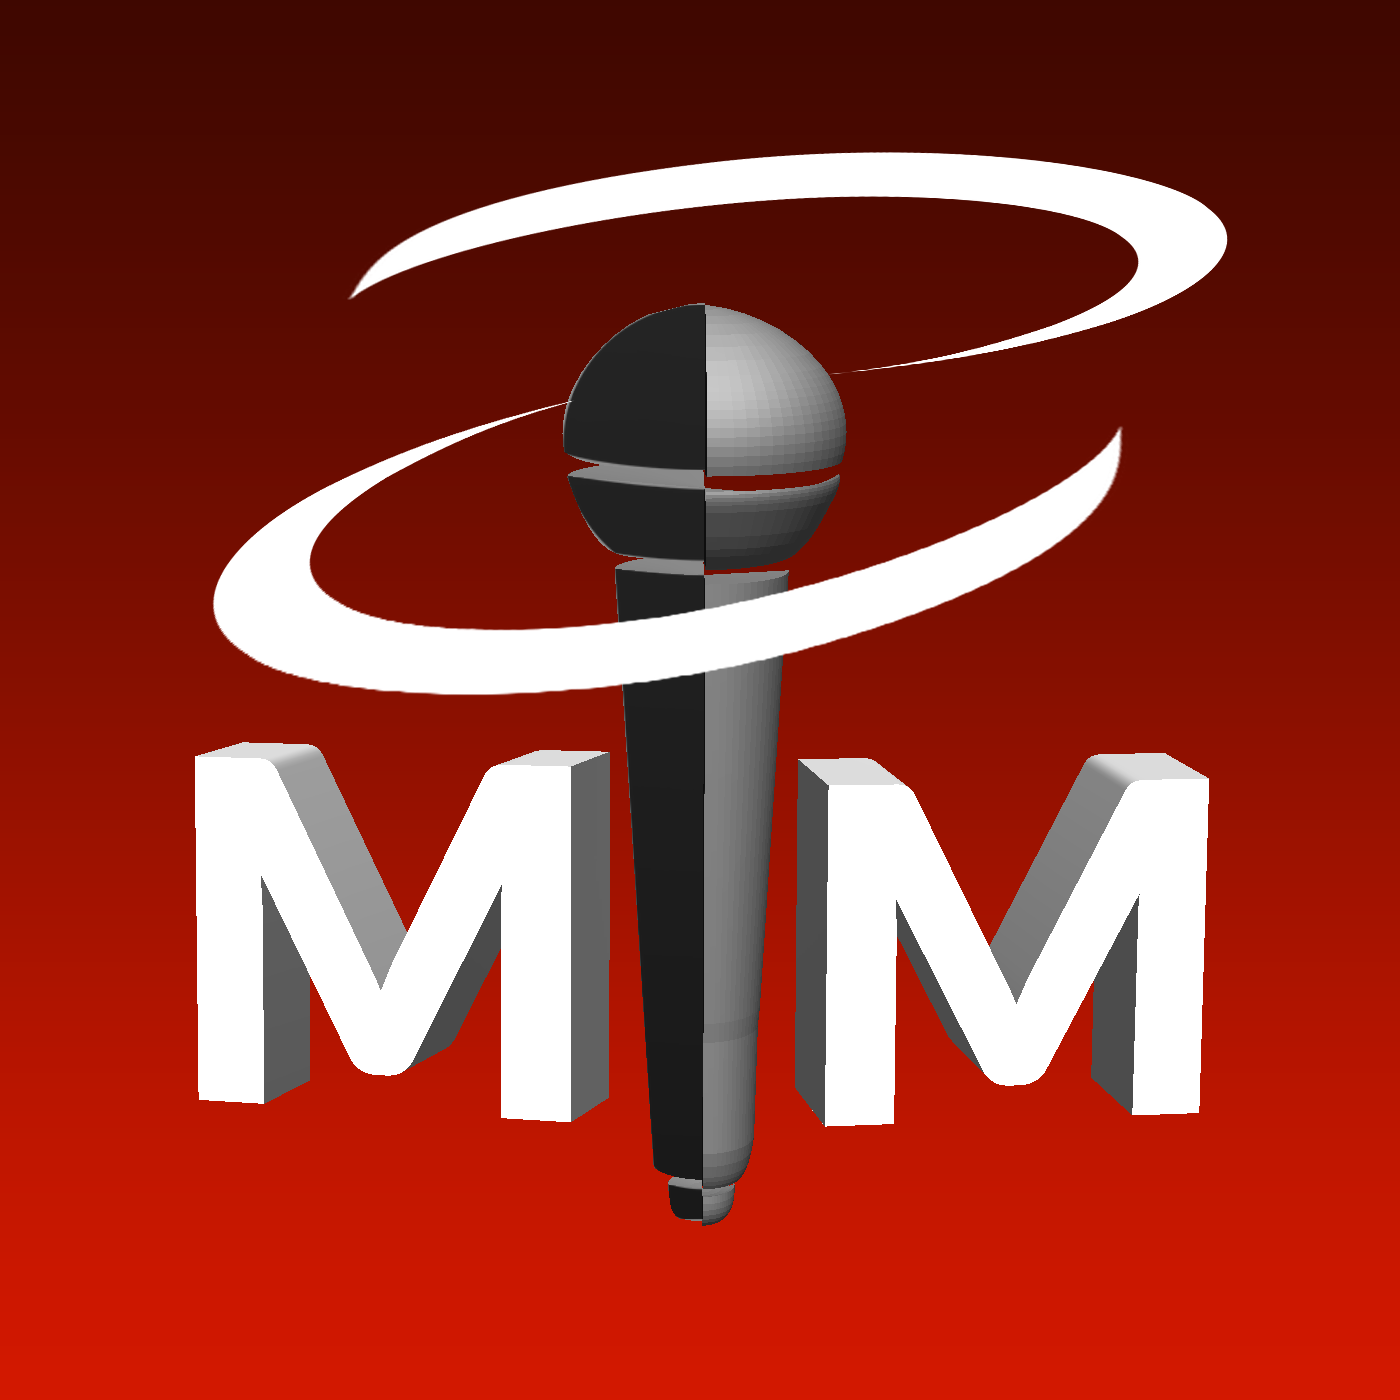 Logo image for MiM (Media in Mind). A capital letter M appears on either side of a standing micorphone against a red gradient background, spelling MiM.